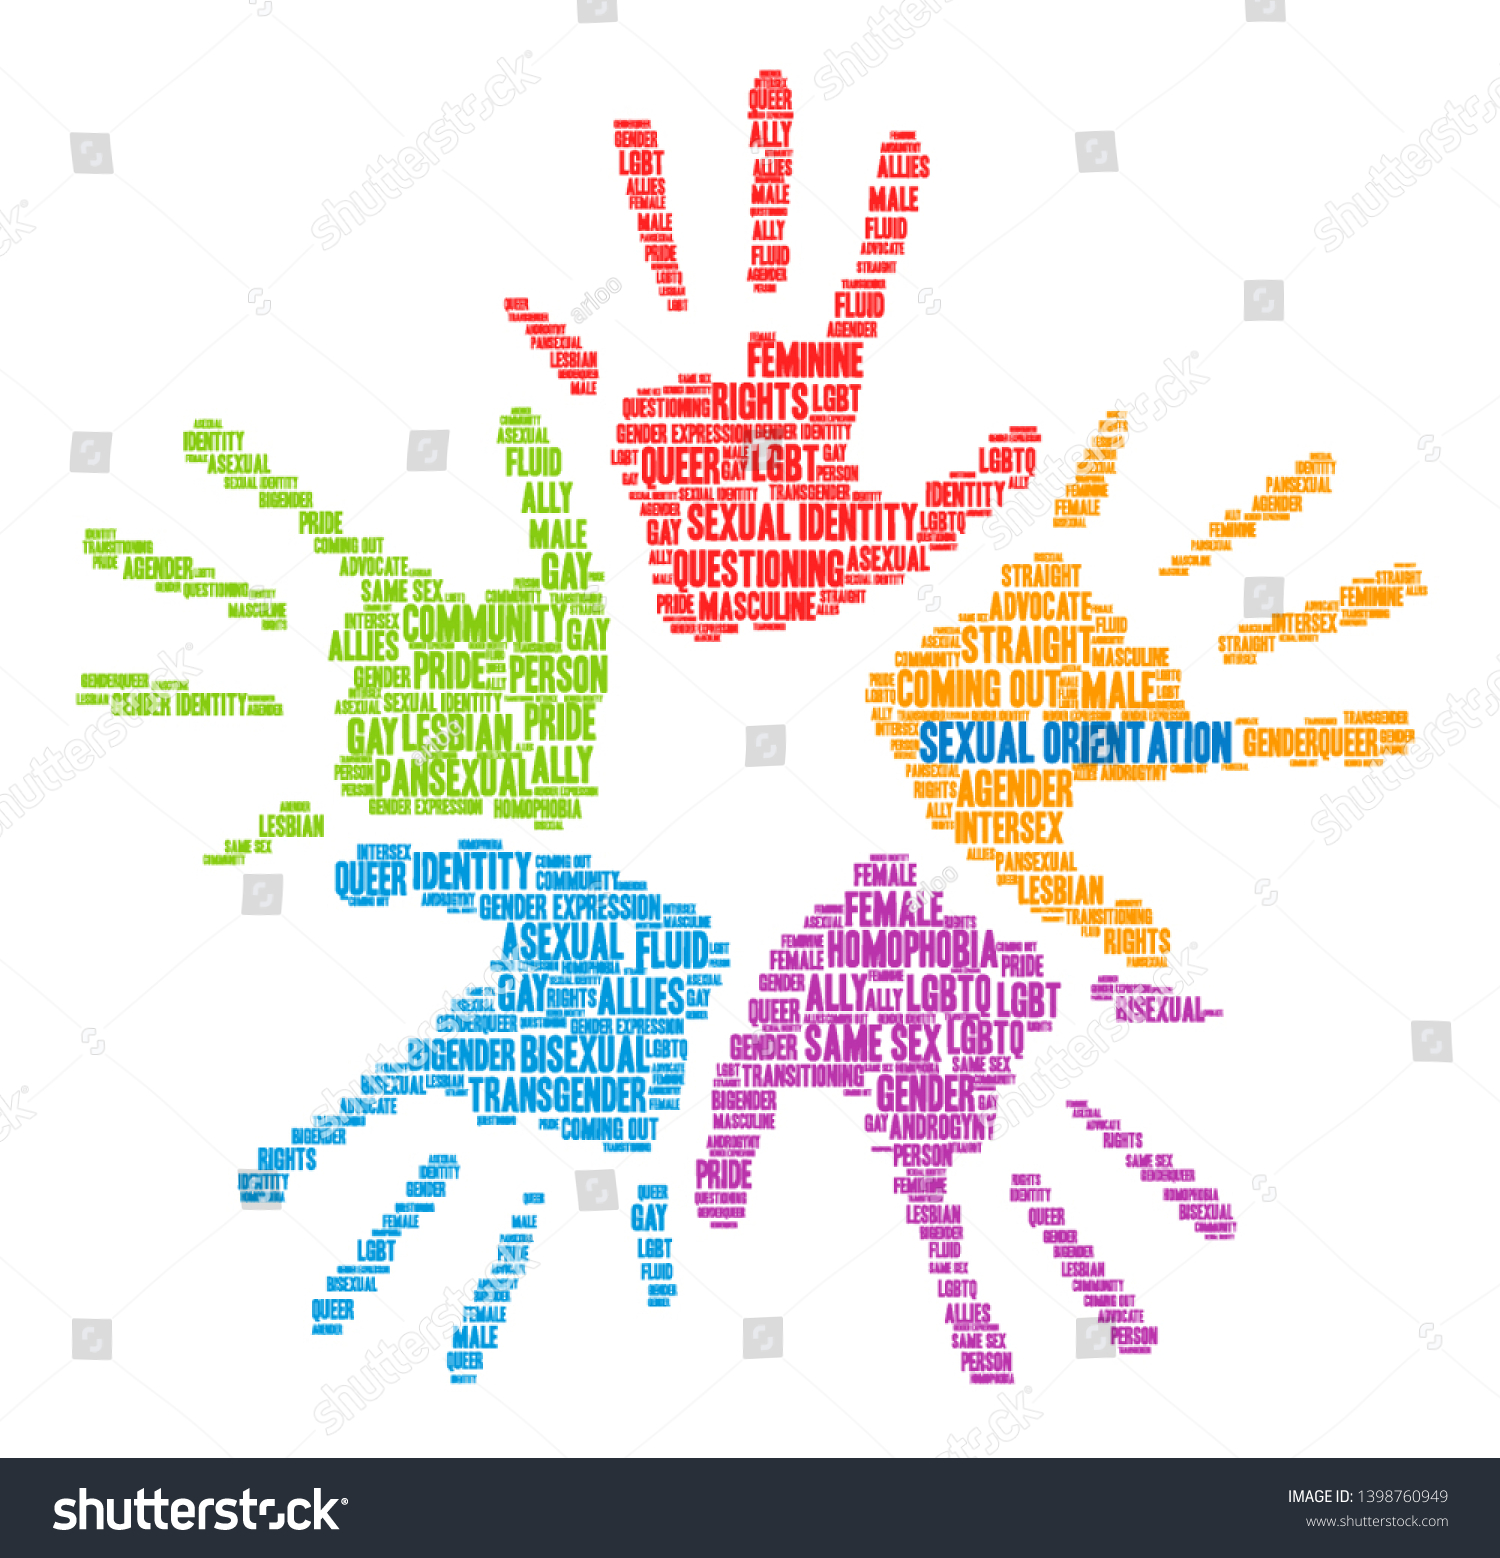 Sexual Orientation Word Cloud On A White Royalty Free Stock Vector 1398760949 6043